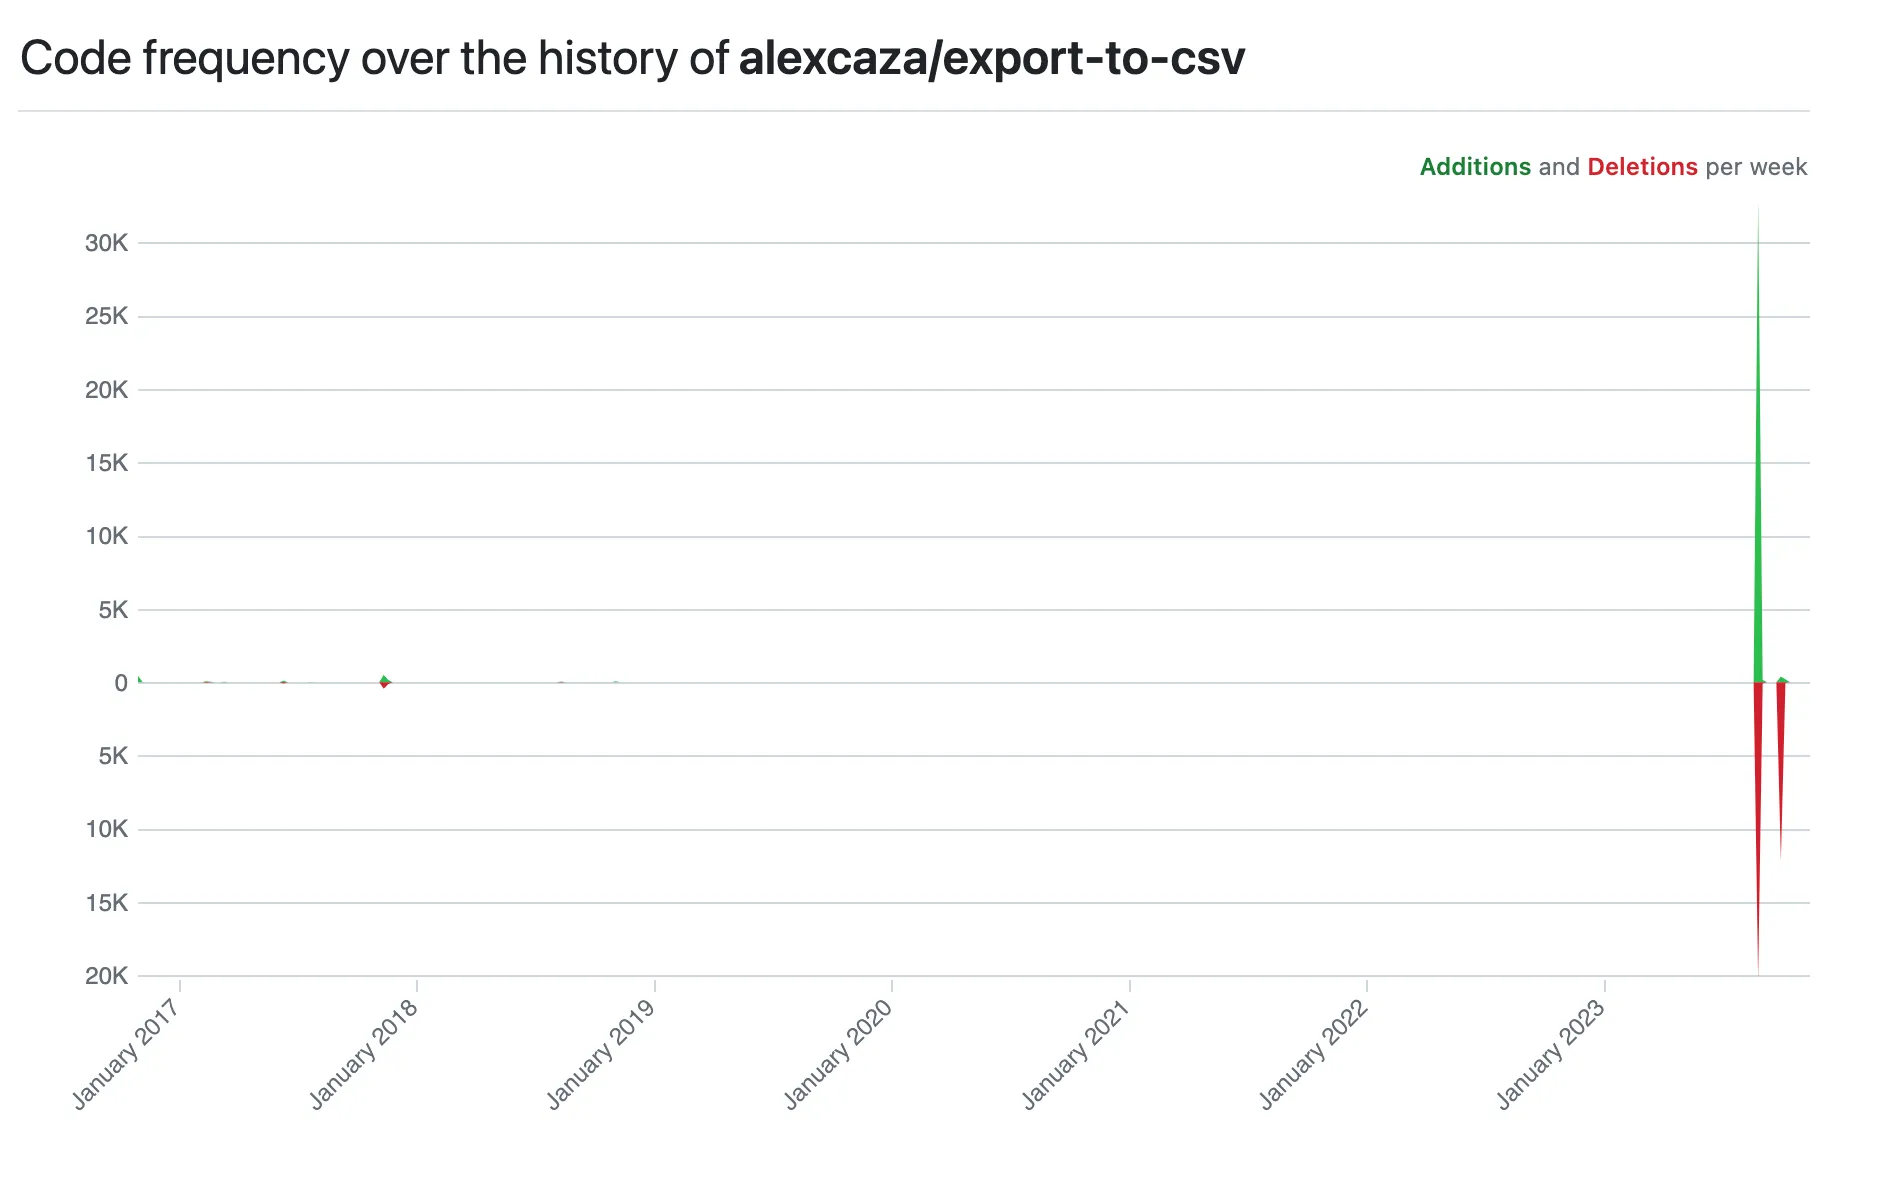 Code change history for the export-to-csv repository